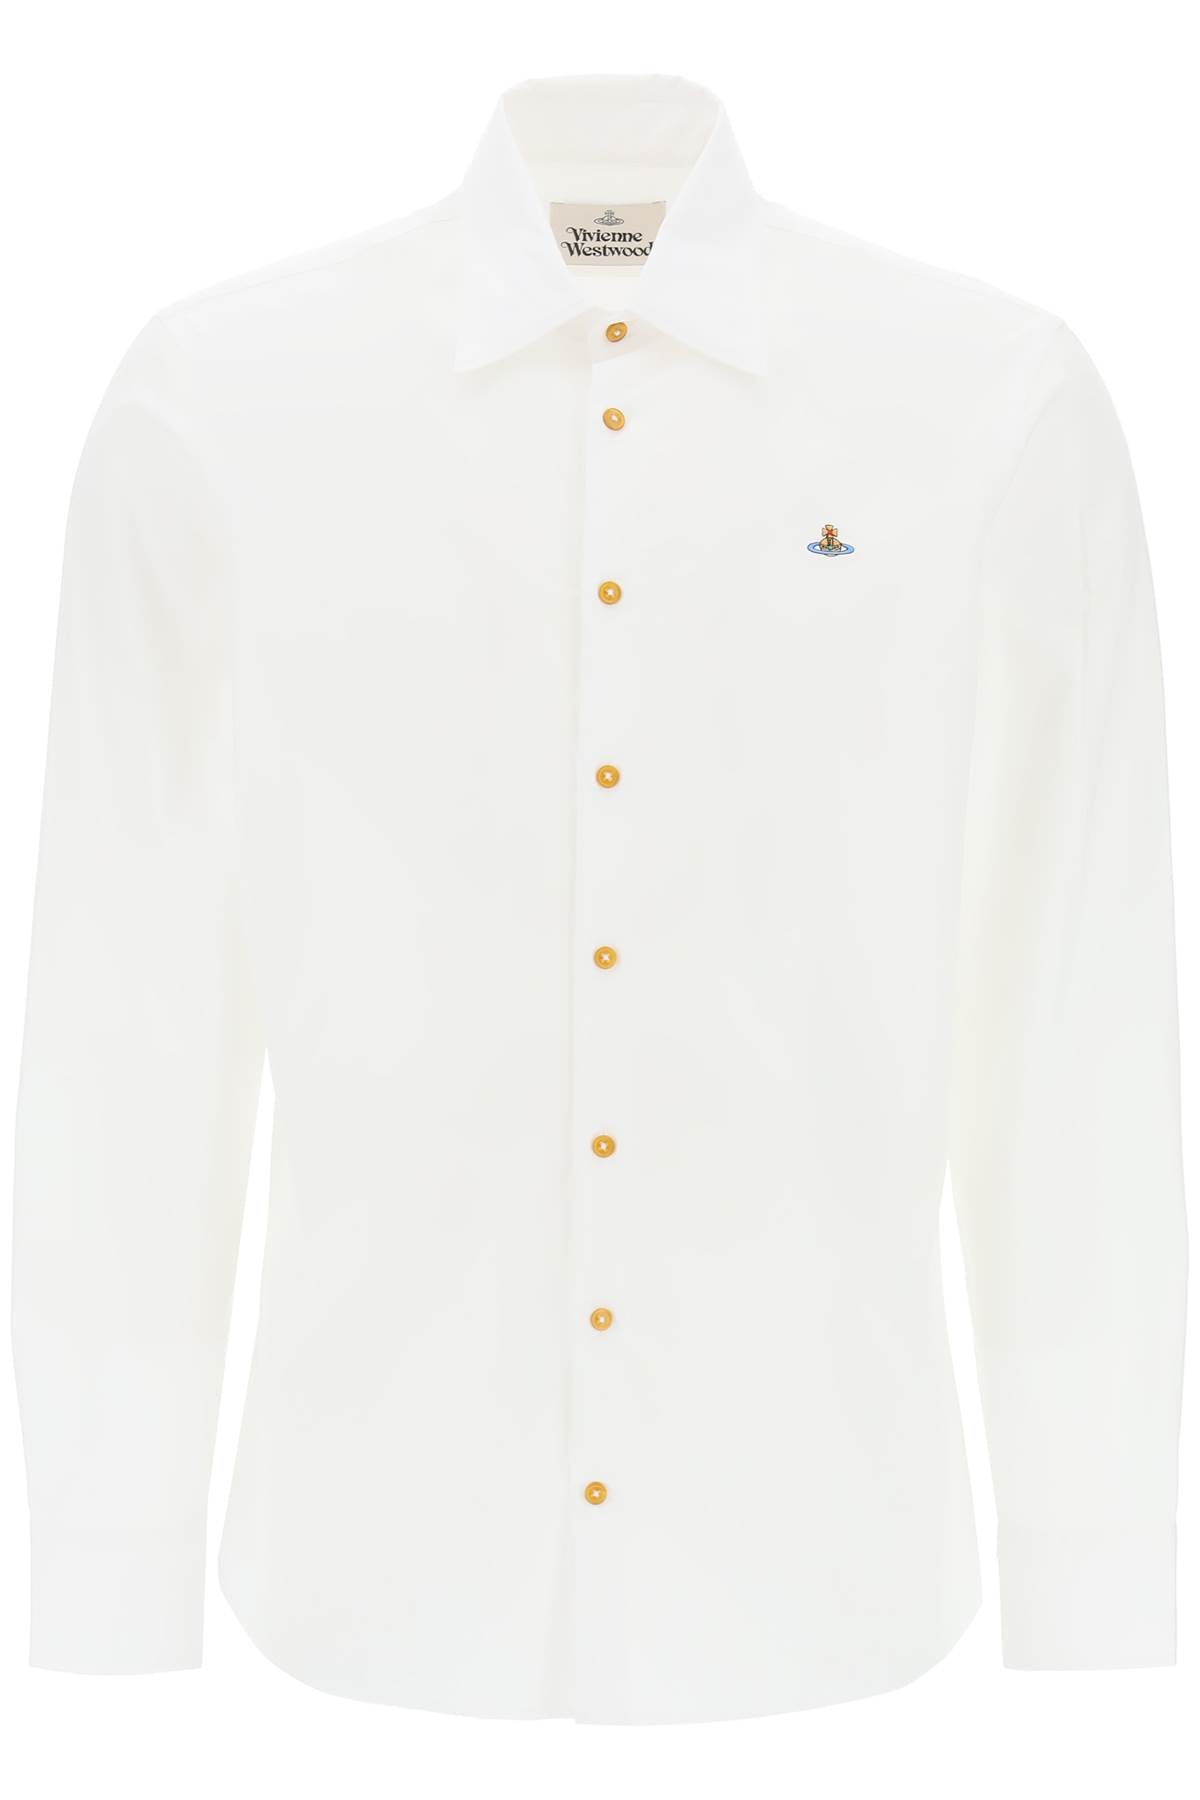 Vivienne westwood ghost shirt with orb embroidery-0